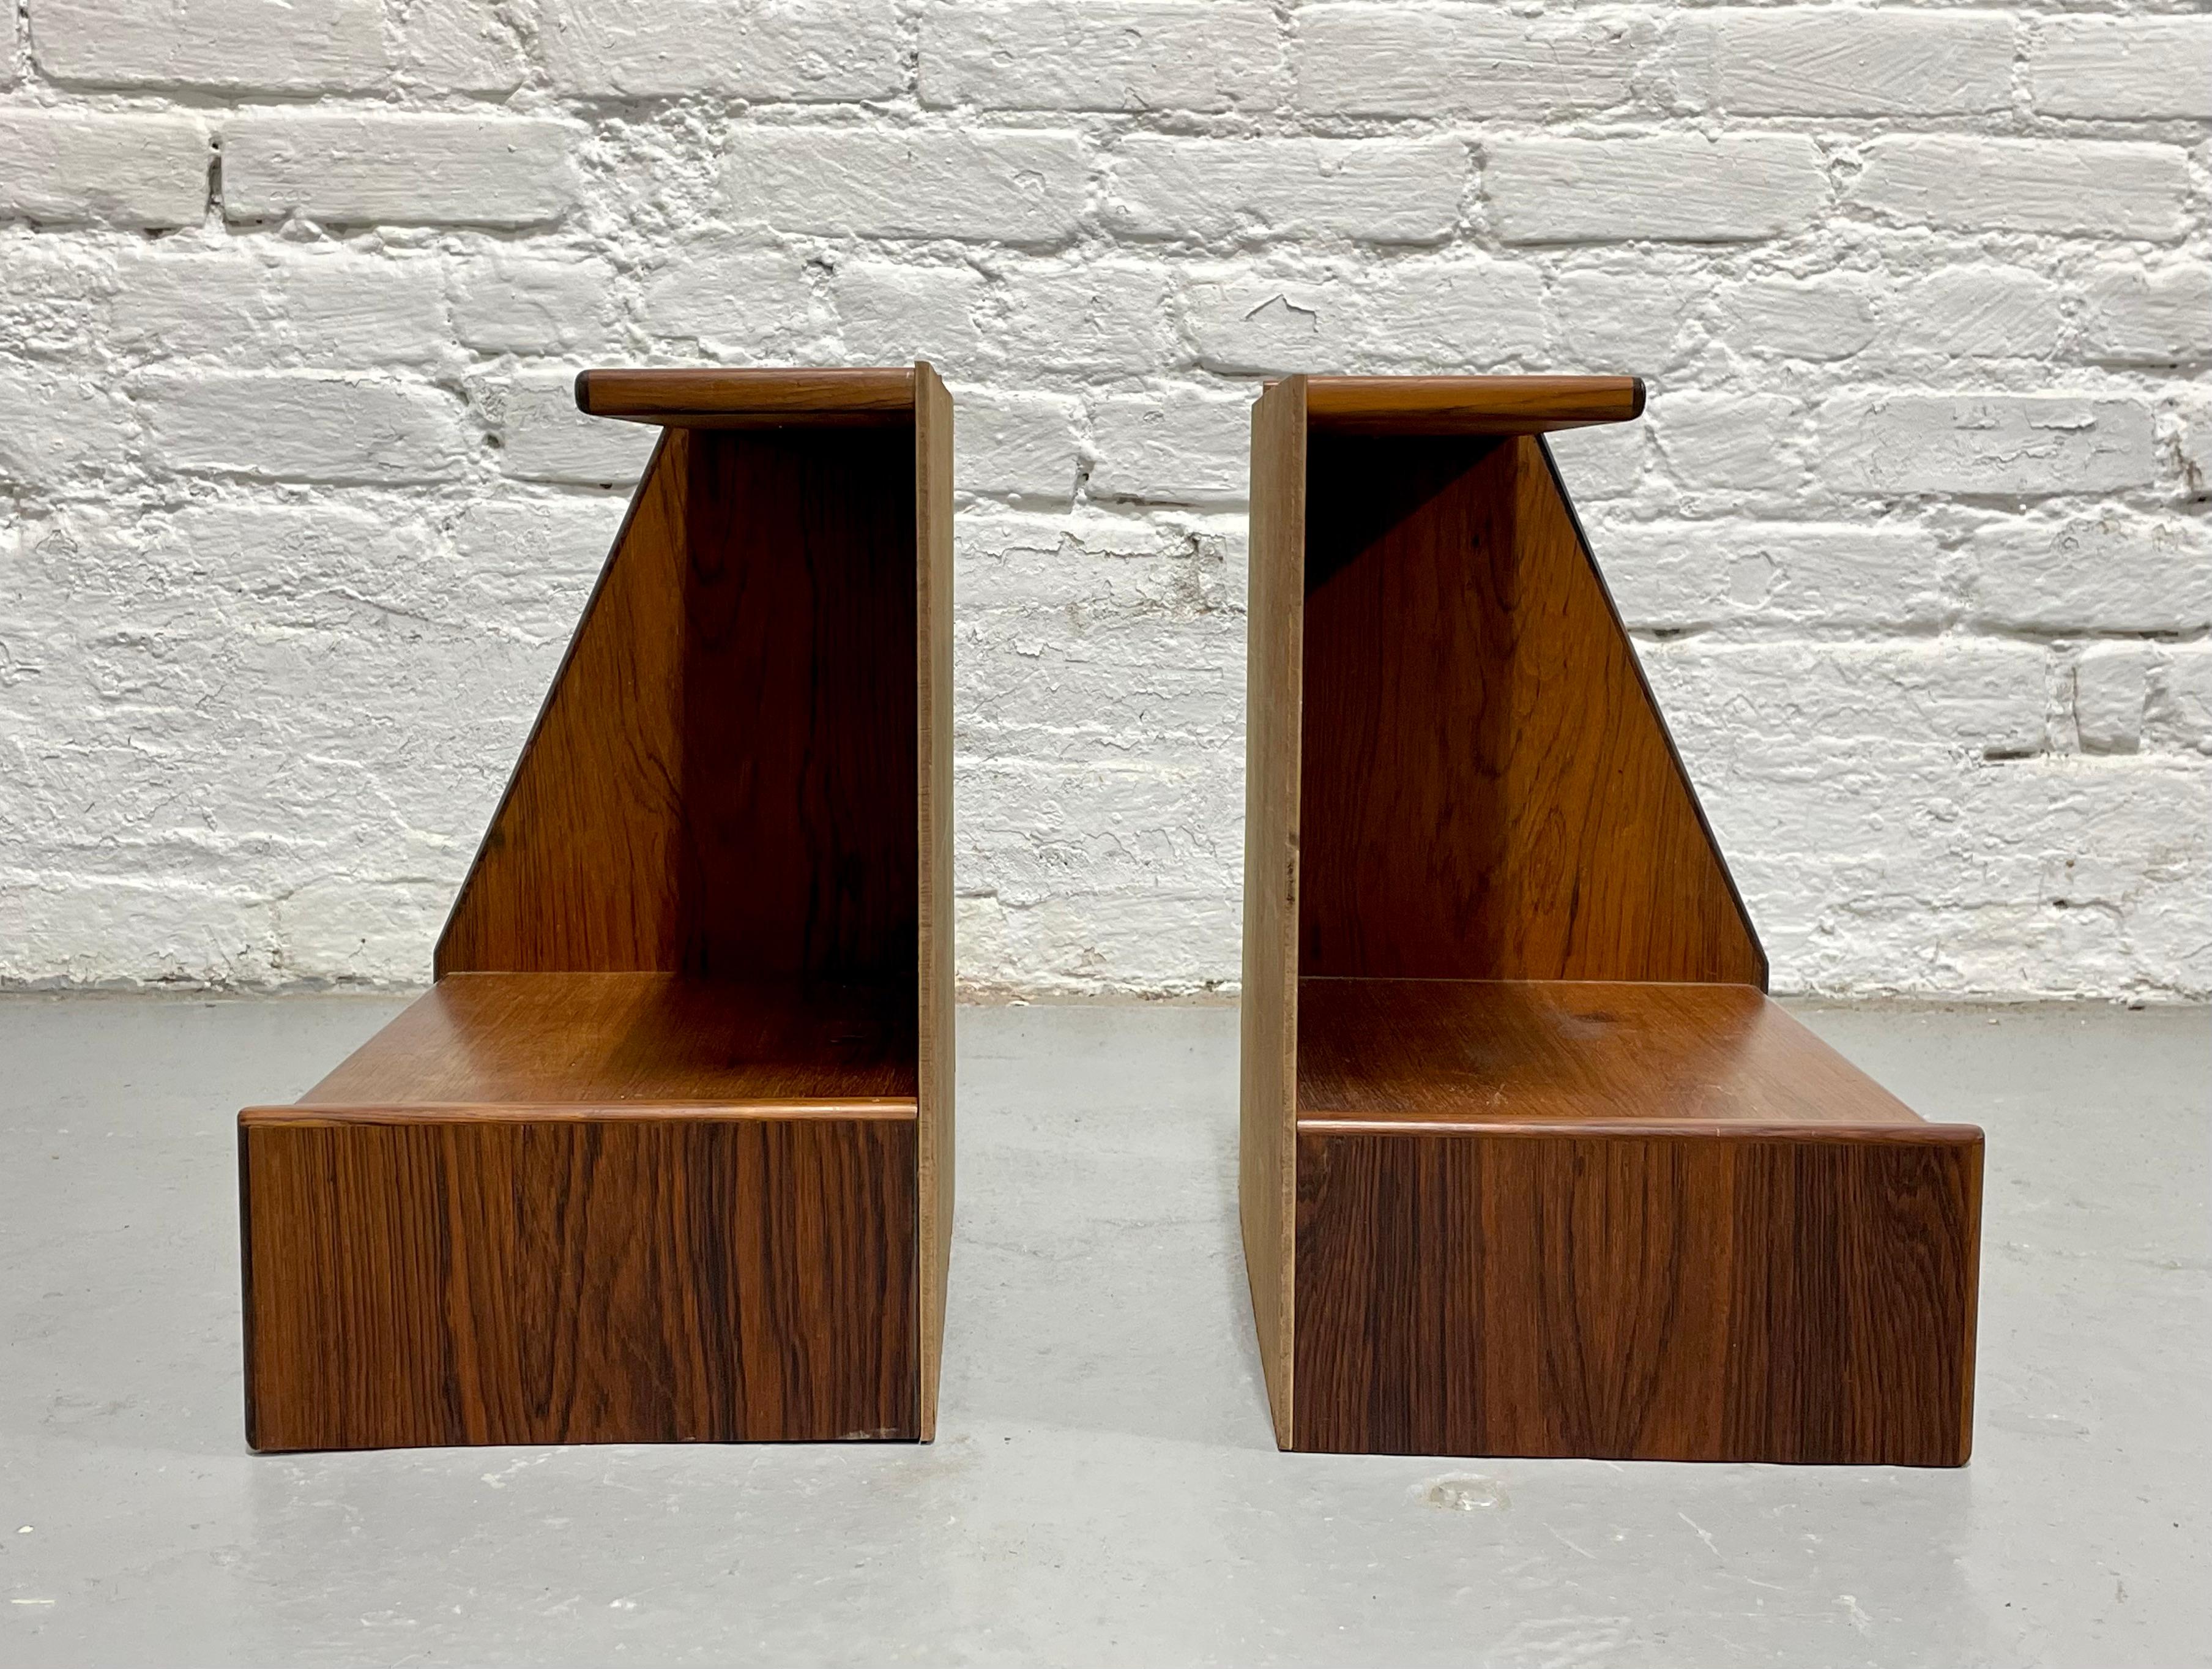 DANISH Mid Century Modern ROSEWOOD Hanging NIGHTSTANDS / Bedside Tables, c. 1950 For Sale 6